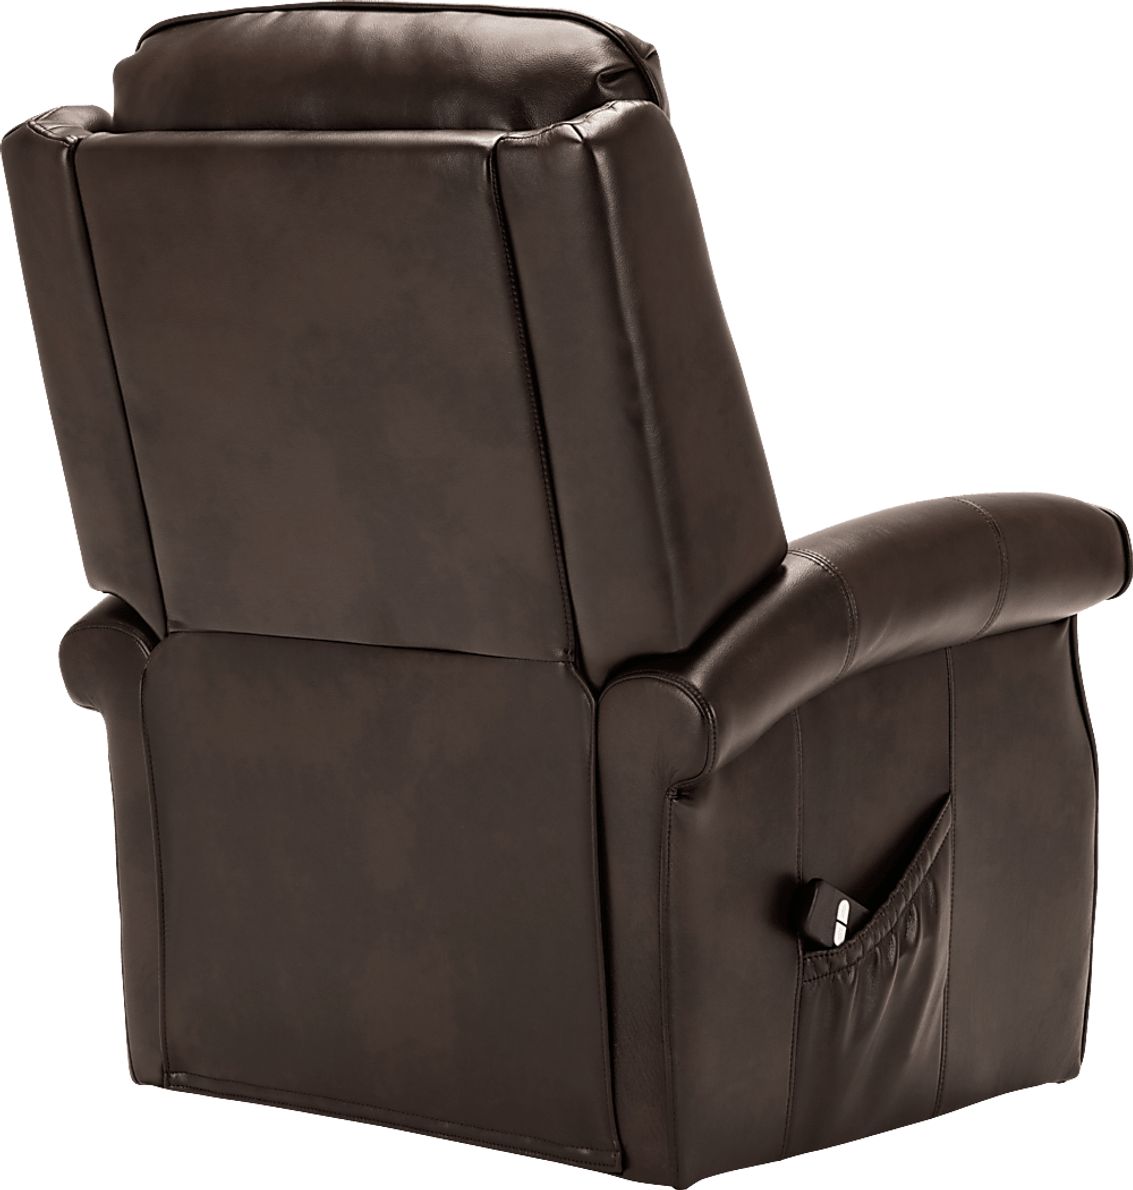 Enright Brown Power Recliner - Rooms To Go